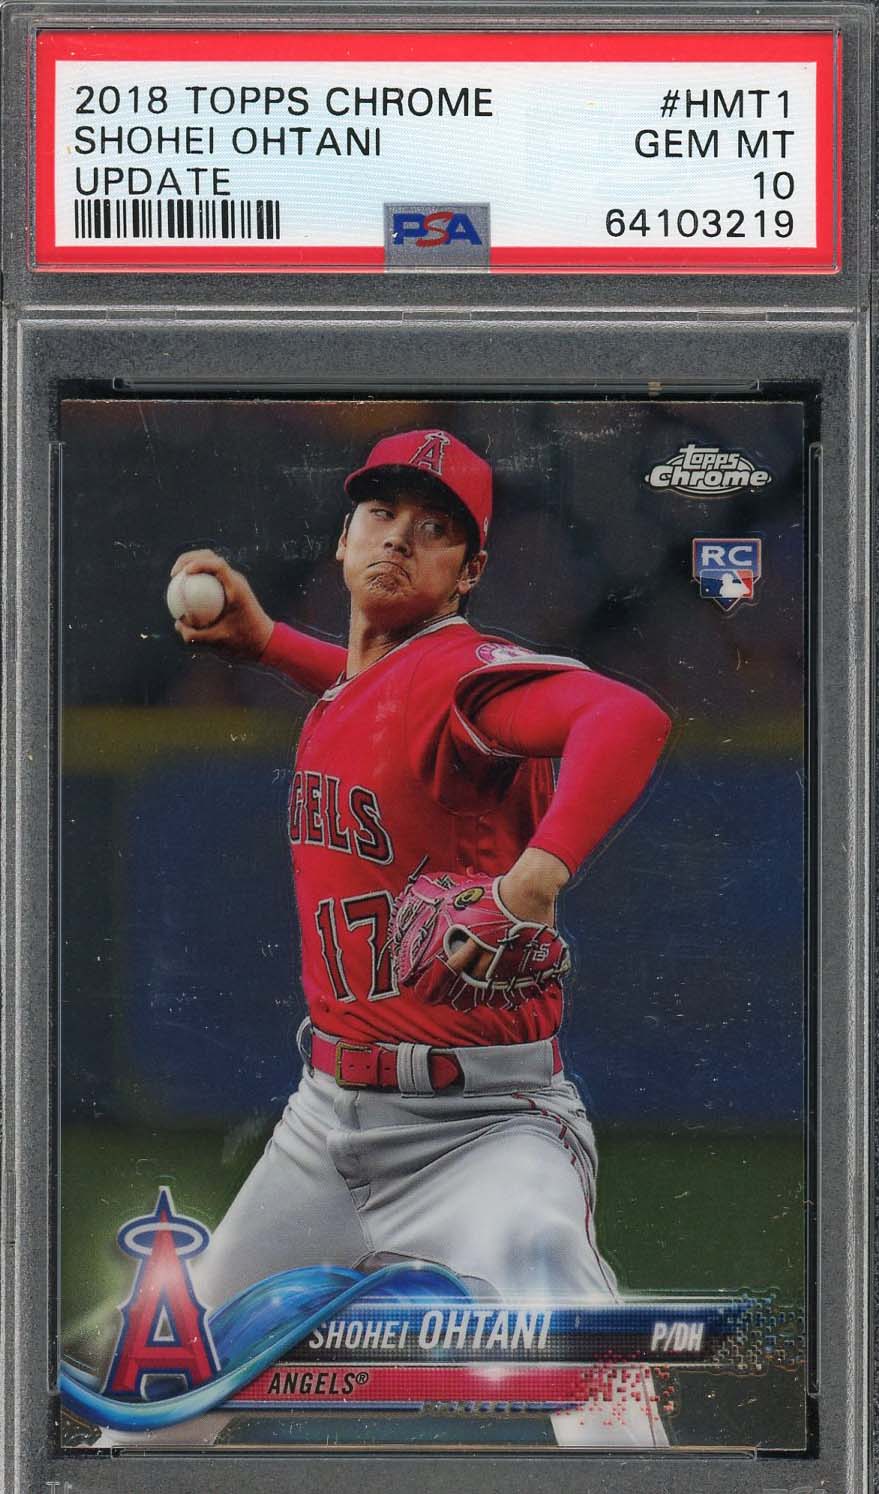 Charitybuzz: Shohei Ohtani PSA 9 Mint Autographed Card, #2 of Only